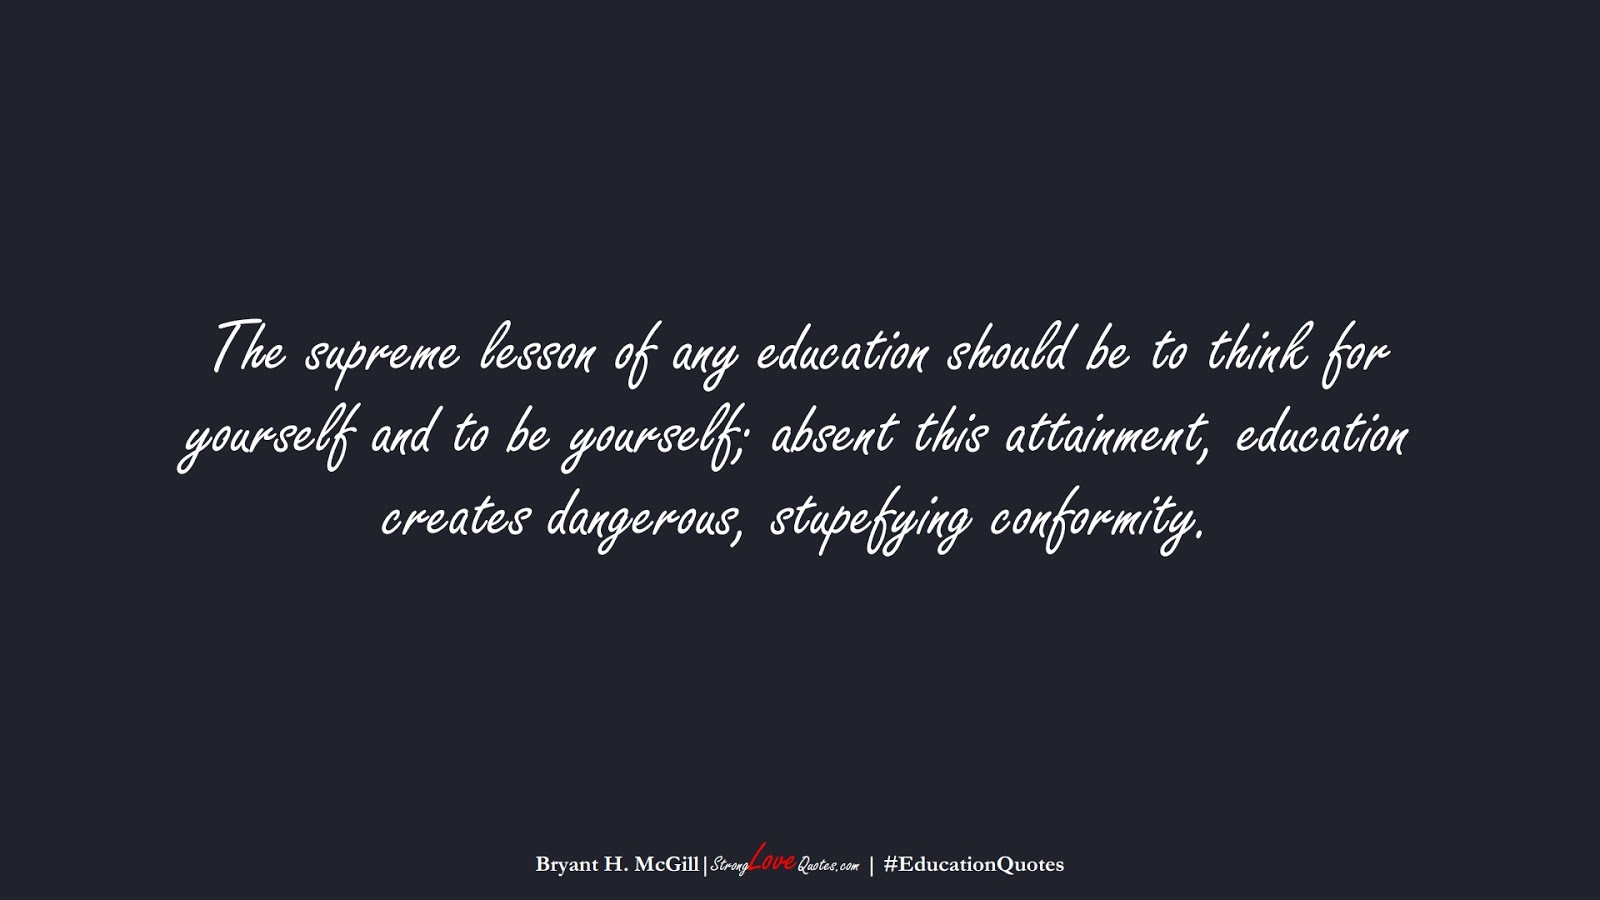 The supreme lesson of any education should be to think for yourself and to be yourself; absent this attainment, education creates dangerous, stupefying conformity. (Bryant H. McGill);  #EducationQuotes